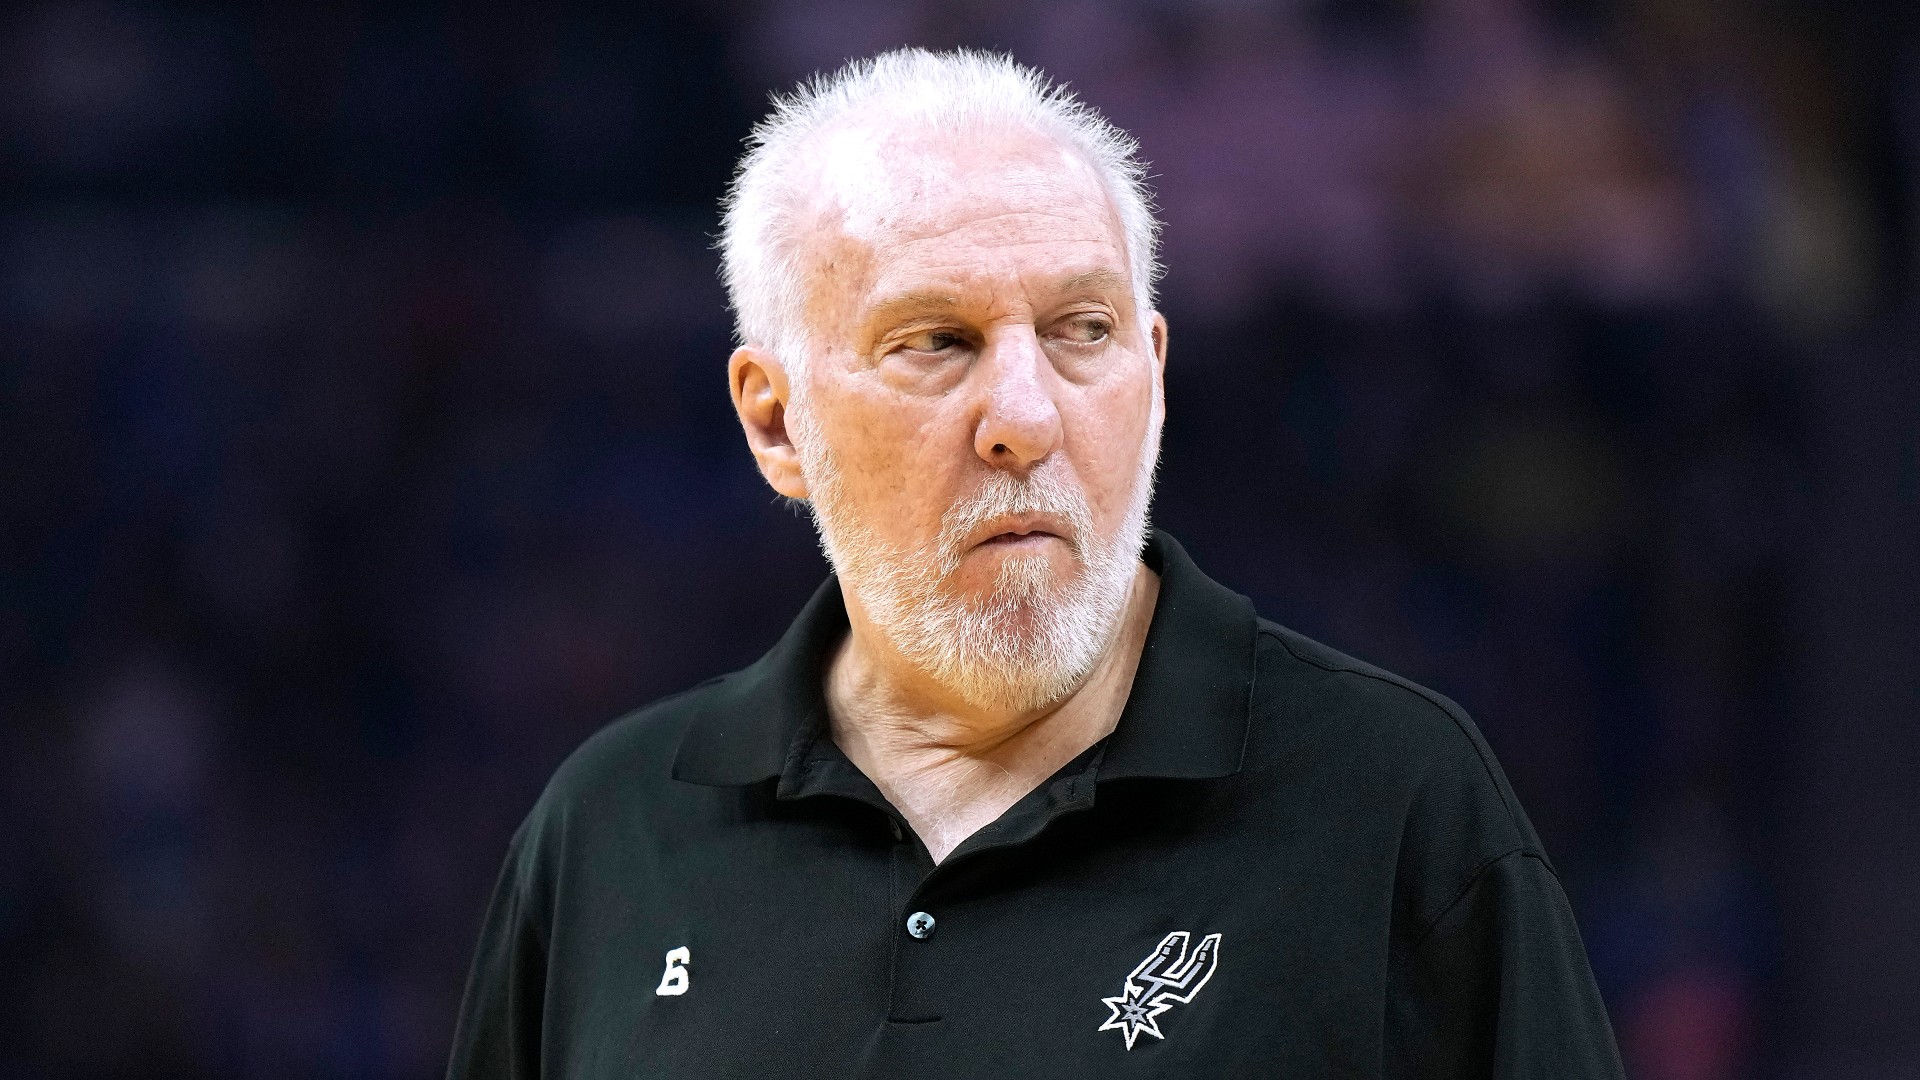 Spurs extend Popovich 5 years